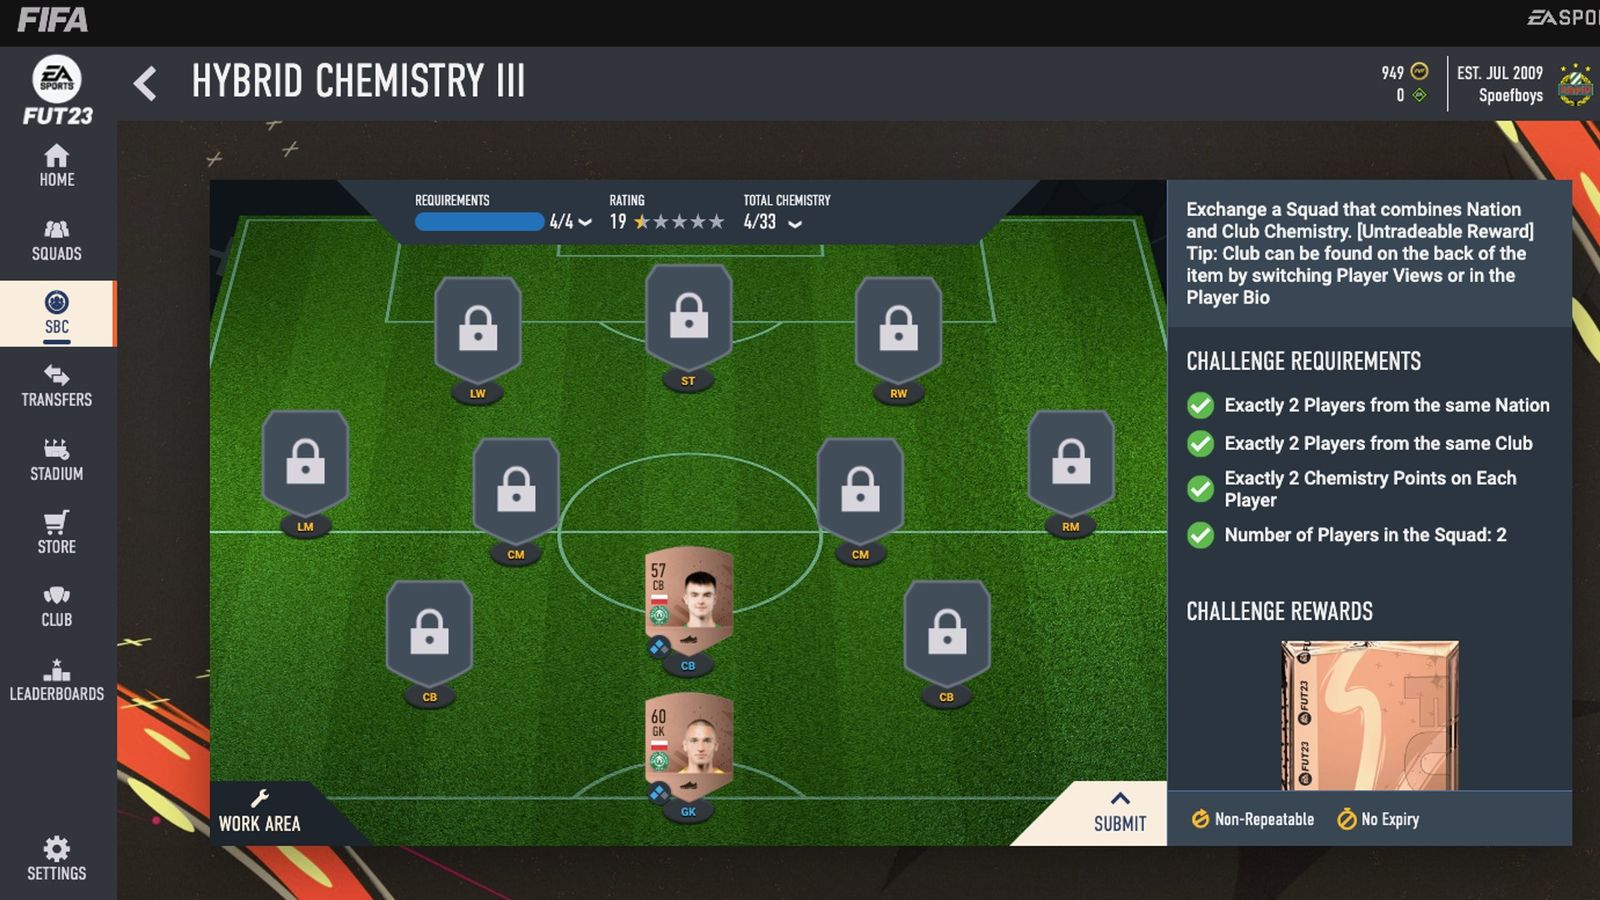 Image of the Hybrid Chemistry 3 SBC in FIFA 23.